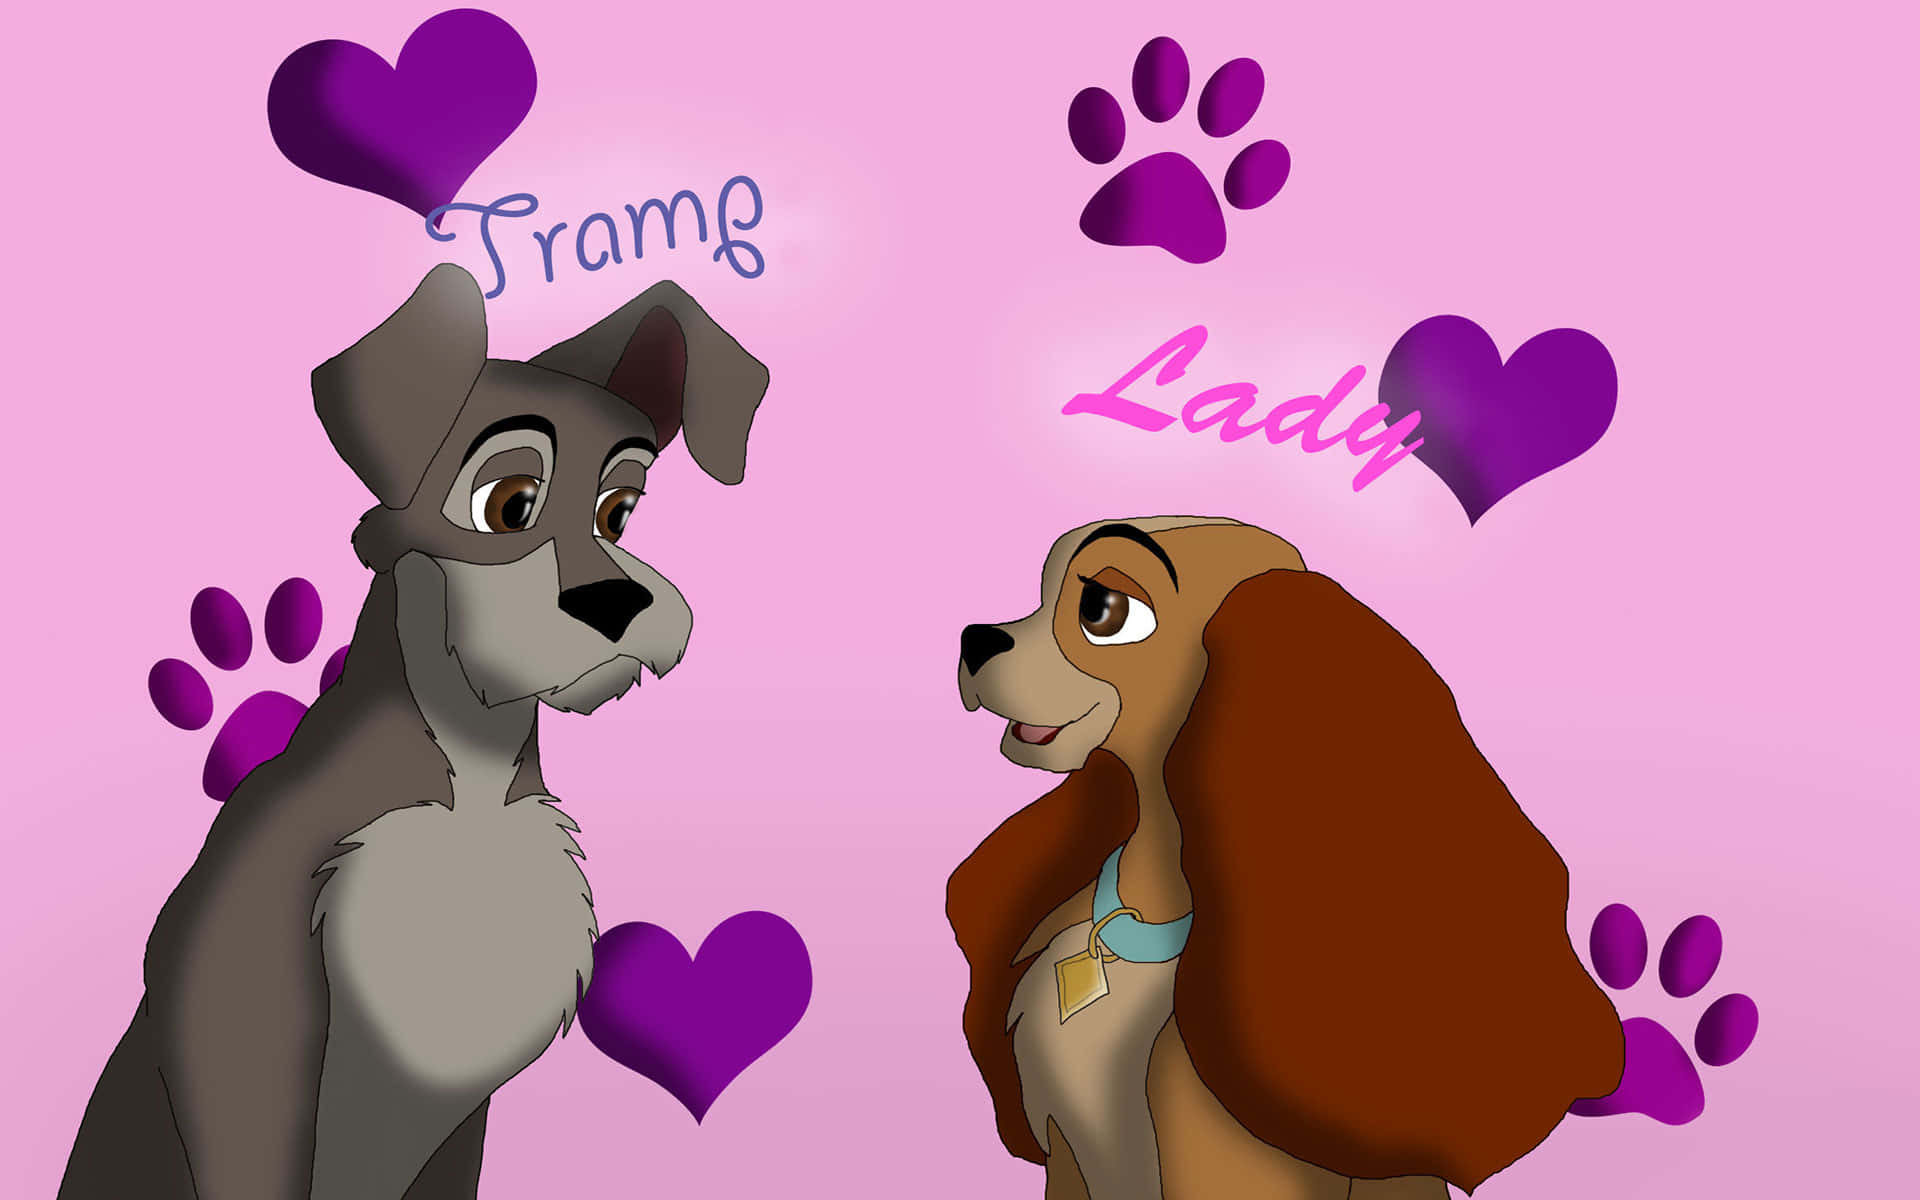 Lady and the Tramp sharing a romantic spaghetti dinner moment Wallpaper